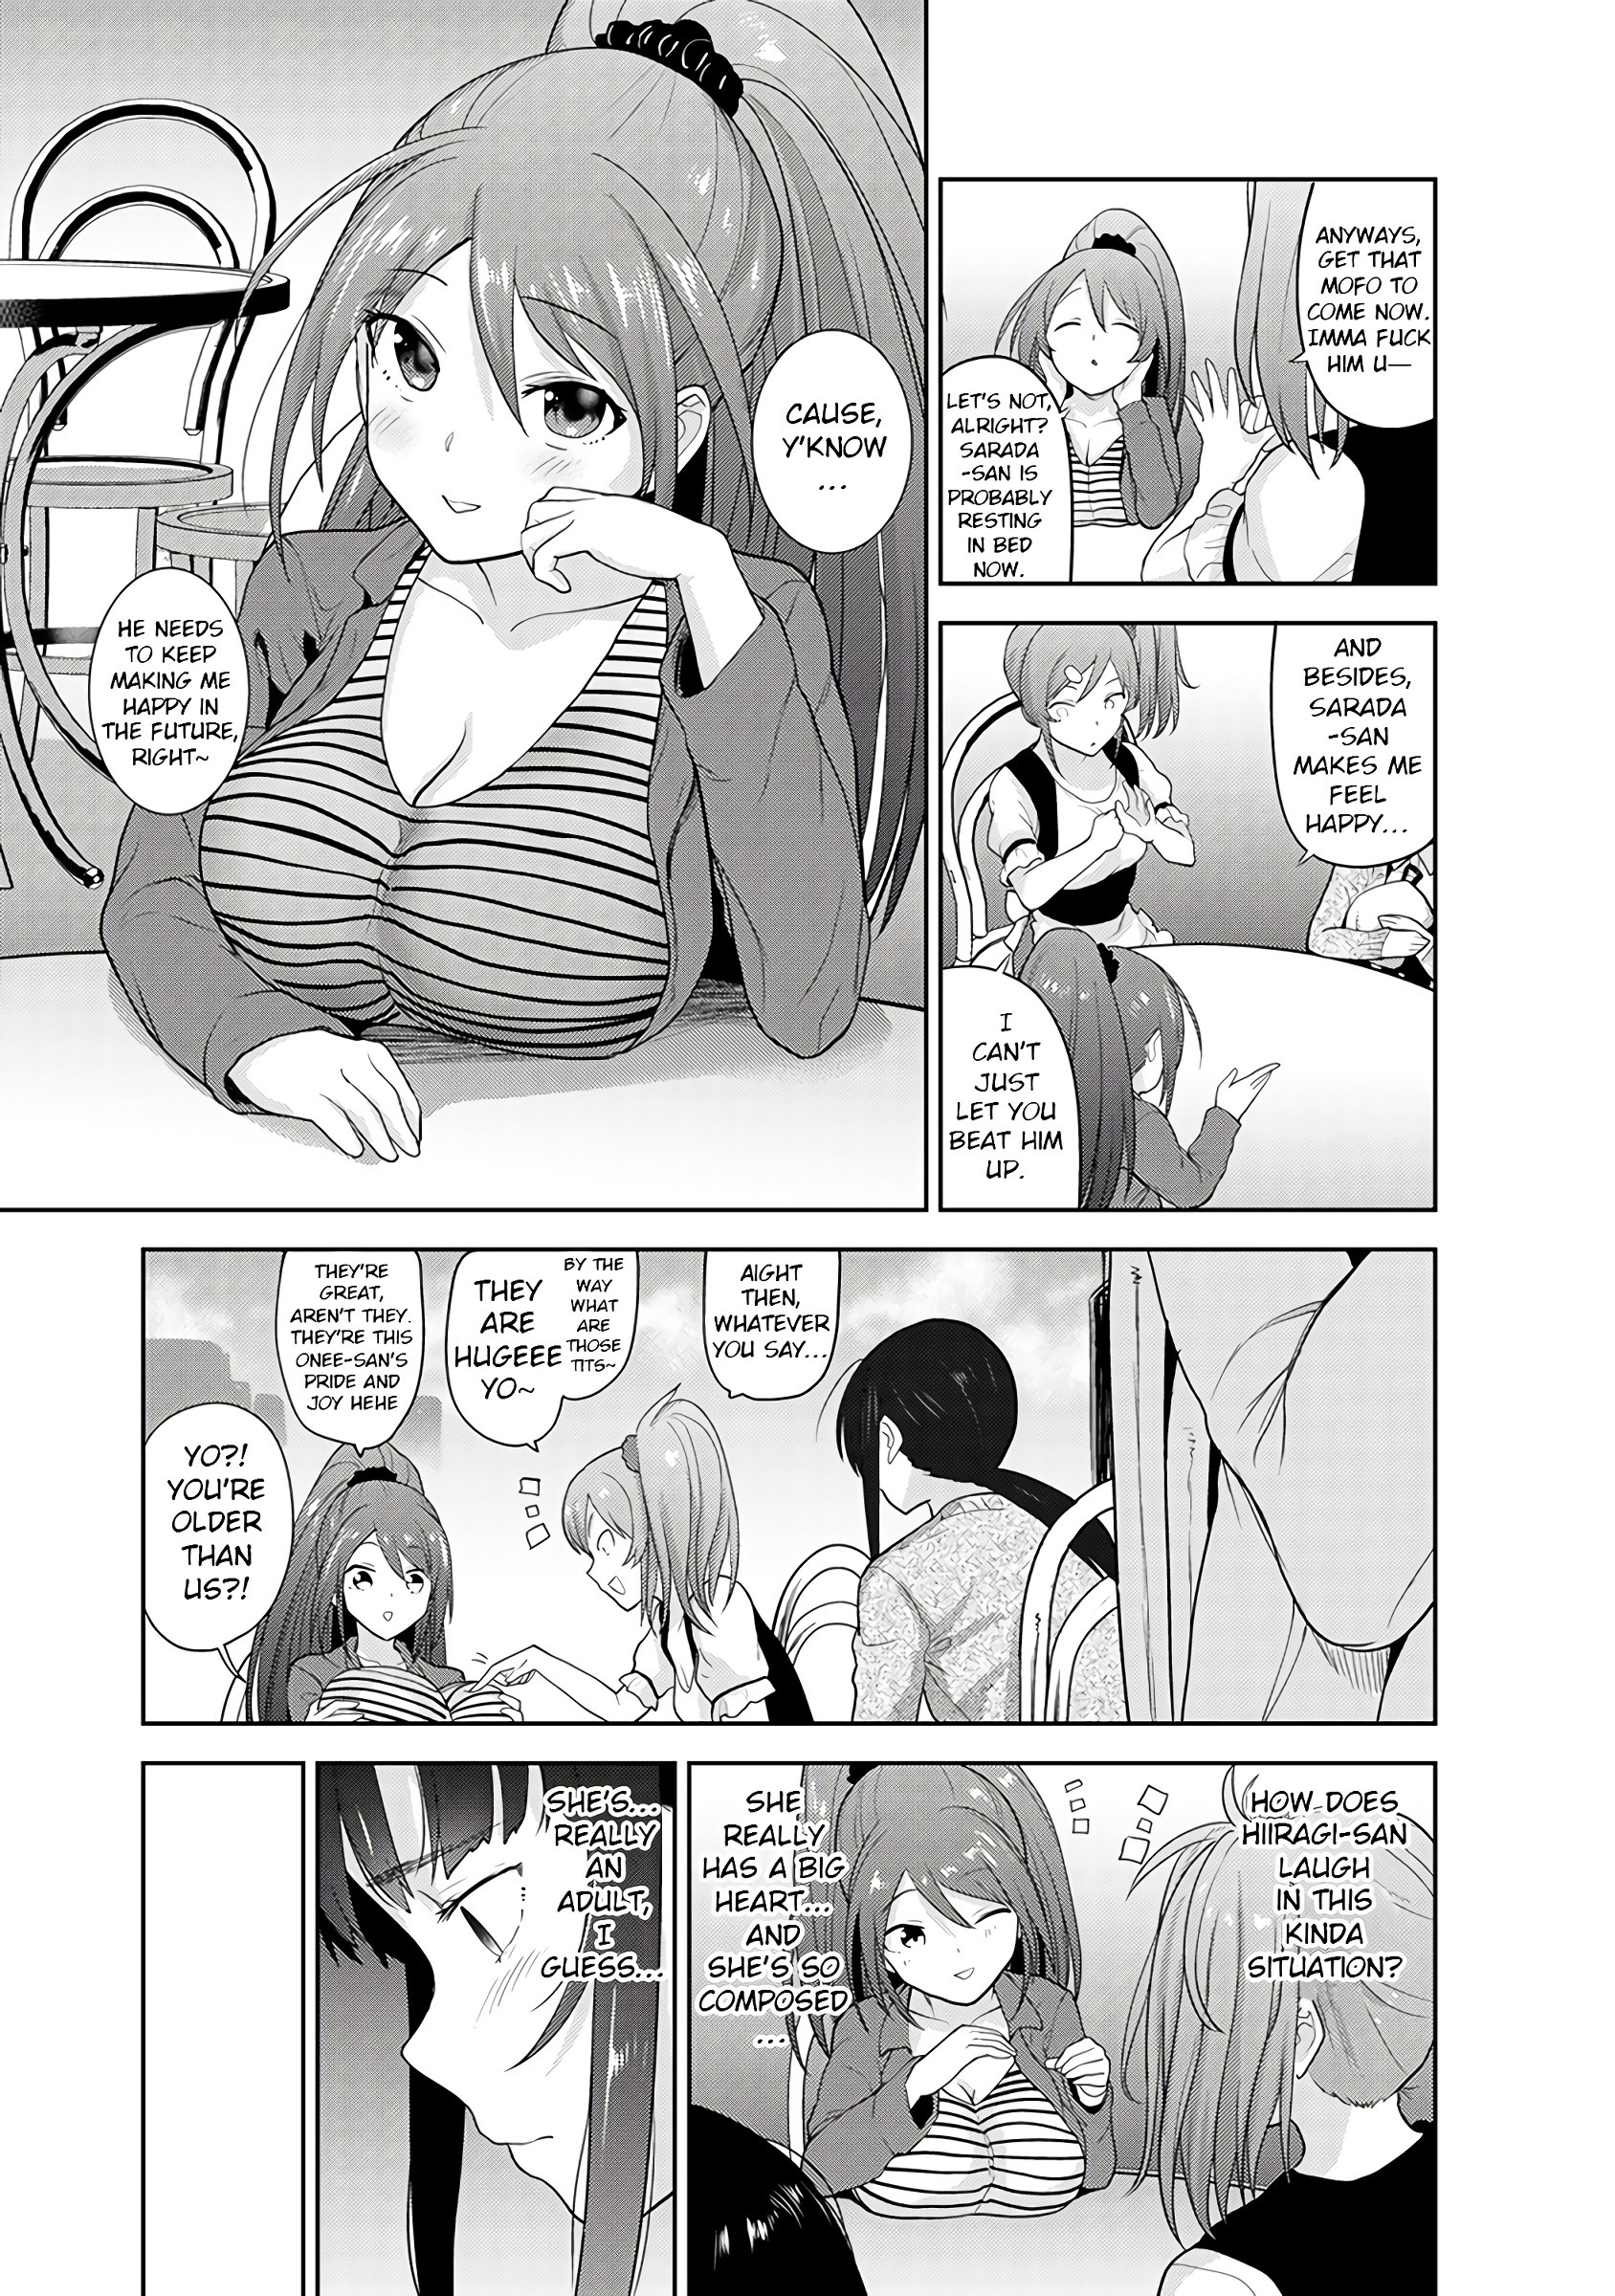 Method to Catch a Pretty Girl 9 hentai manga picture 16